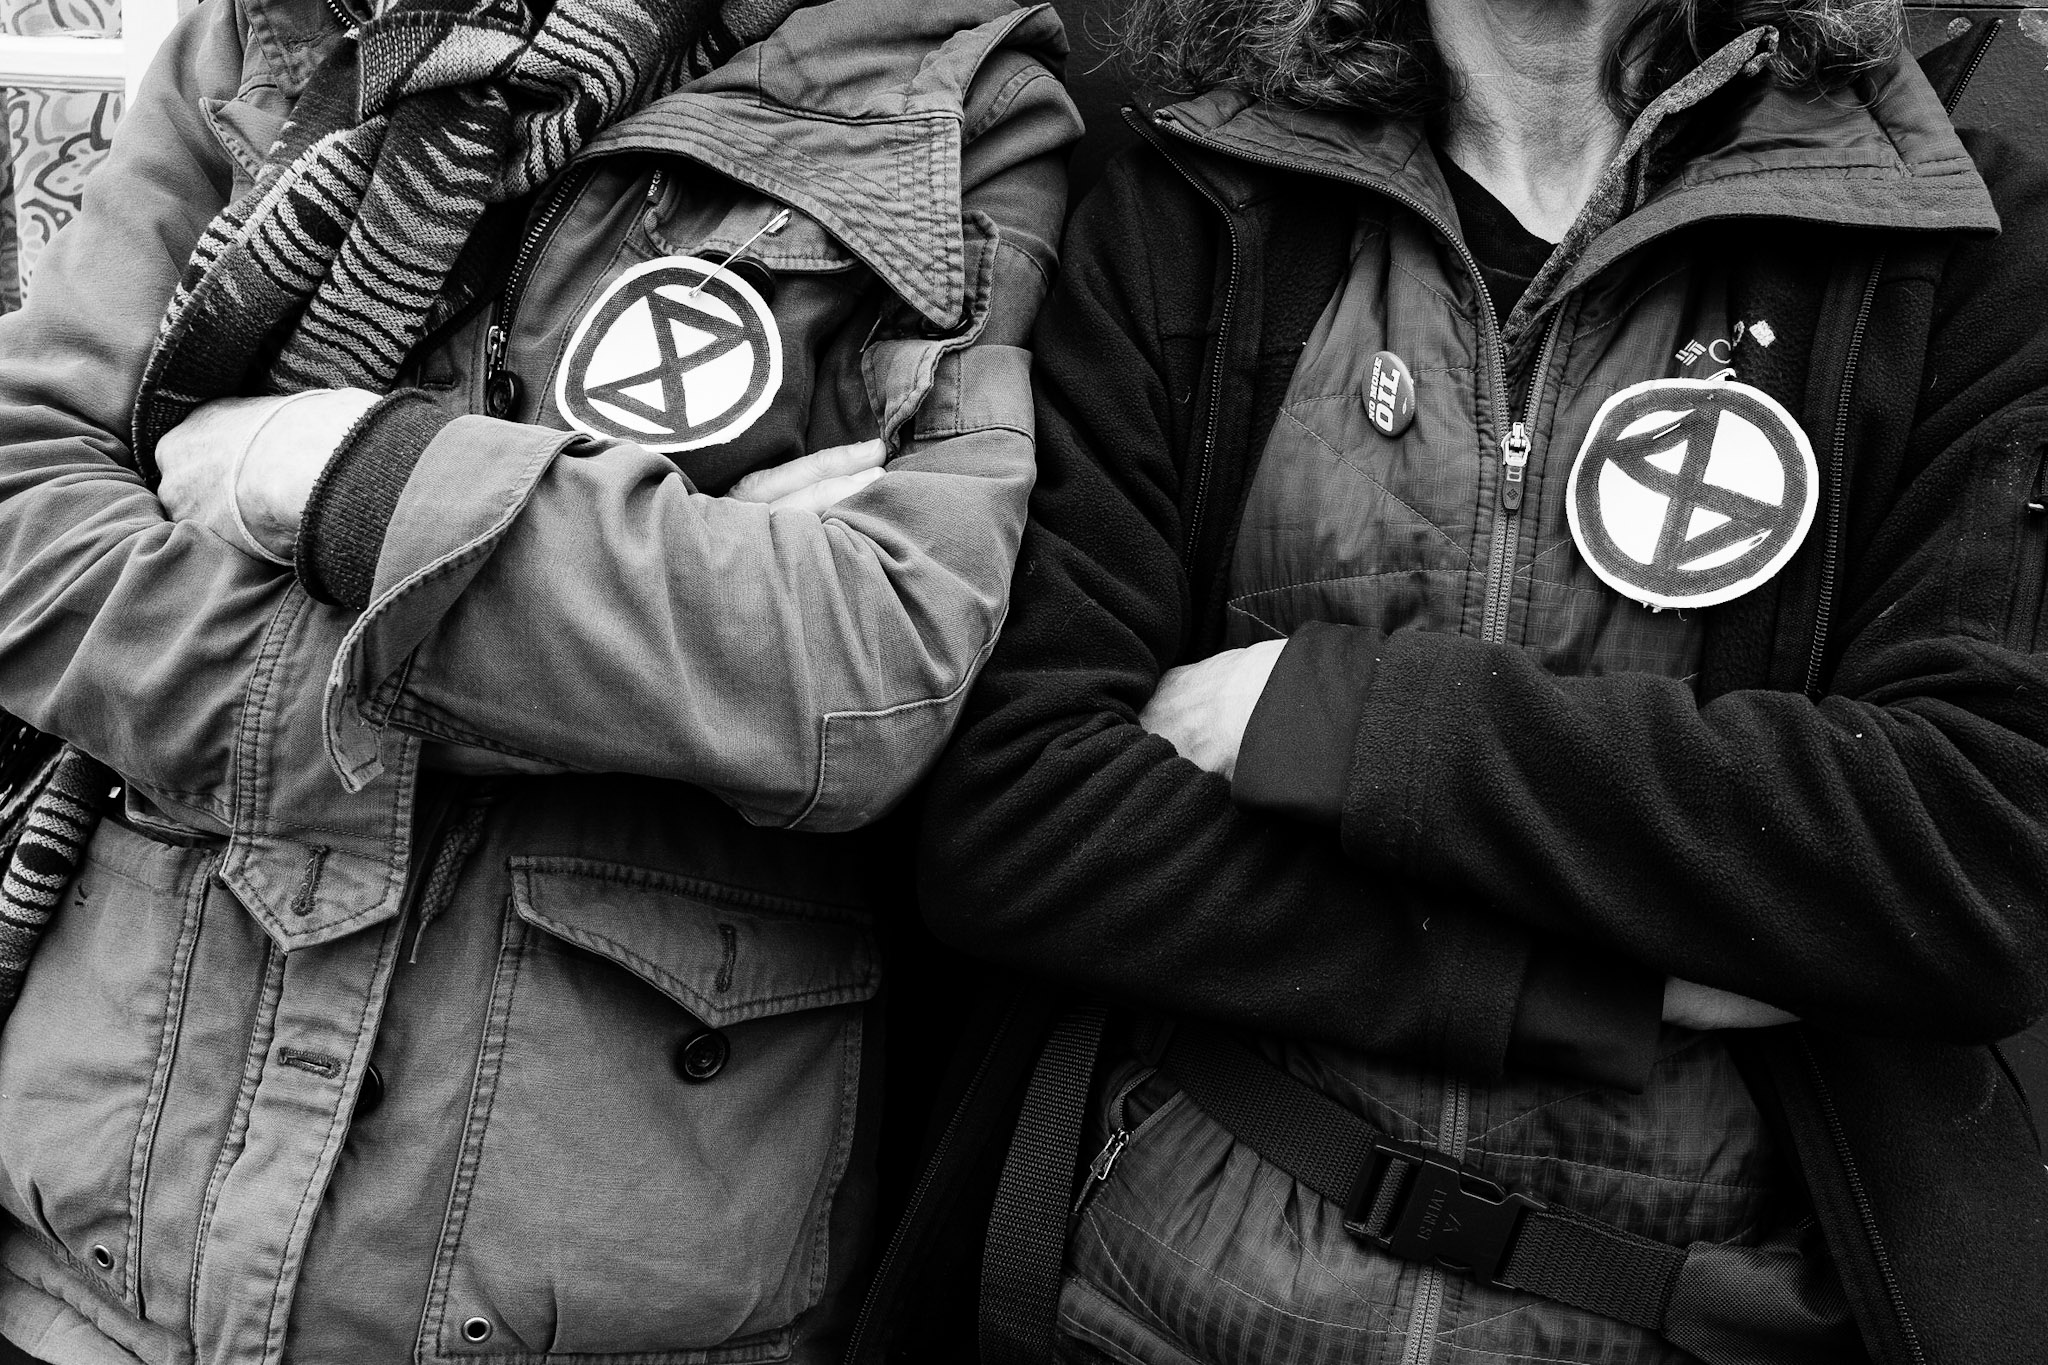 B&W photo of two people where jackets with XR patches pinned to them.